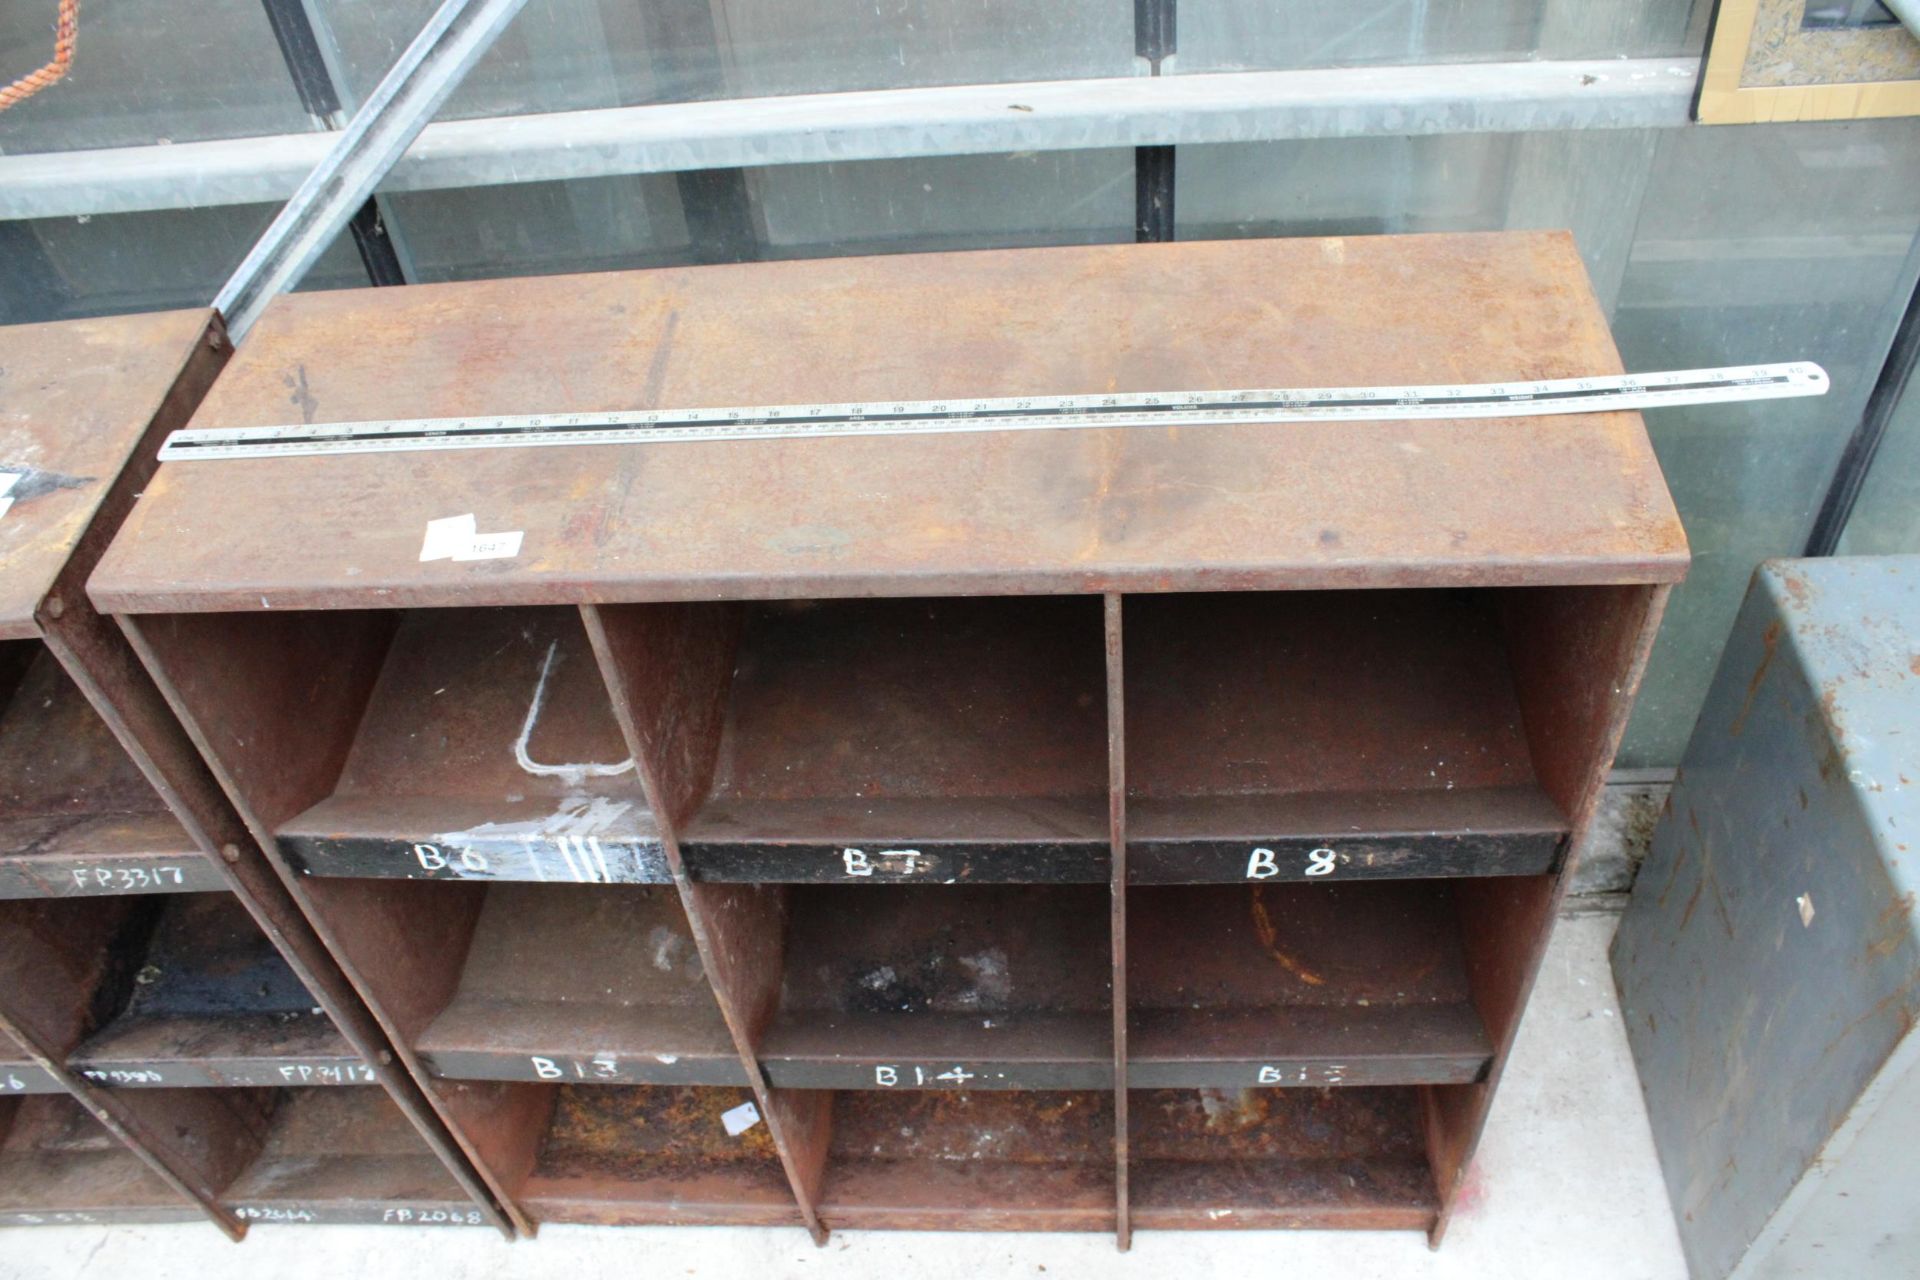 A NINE SECTION METAL PIGEON HOLE UNIT - Image 4 of 4